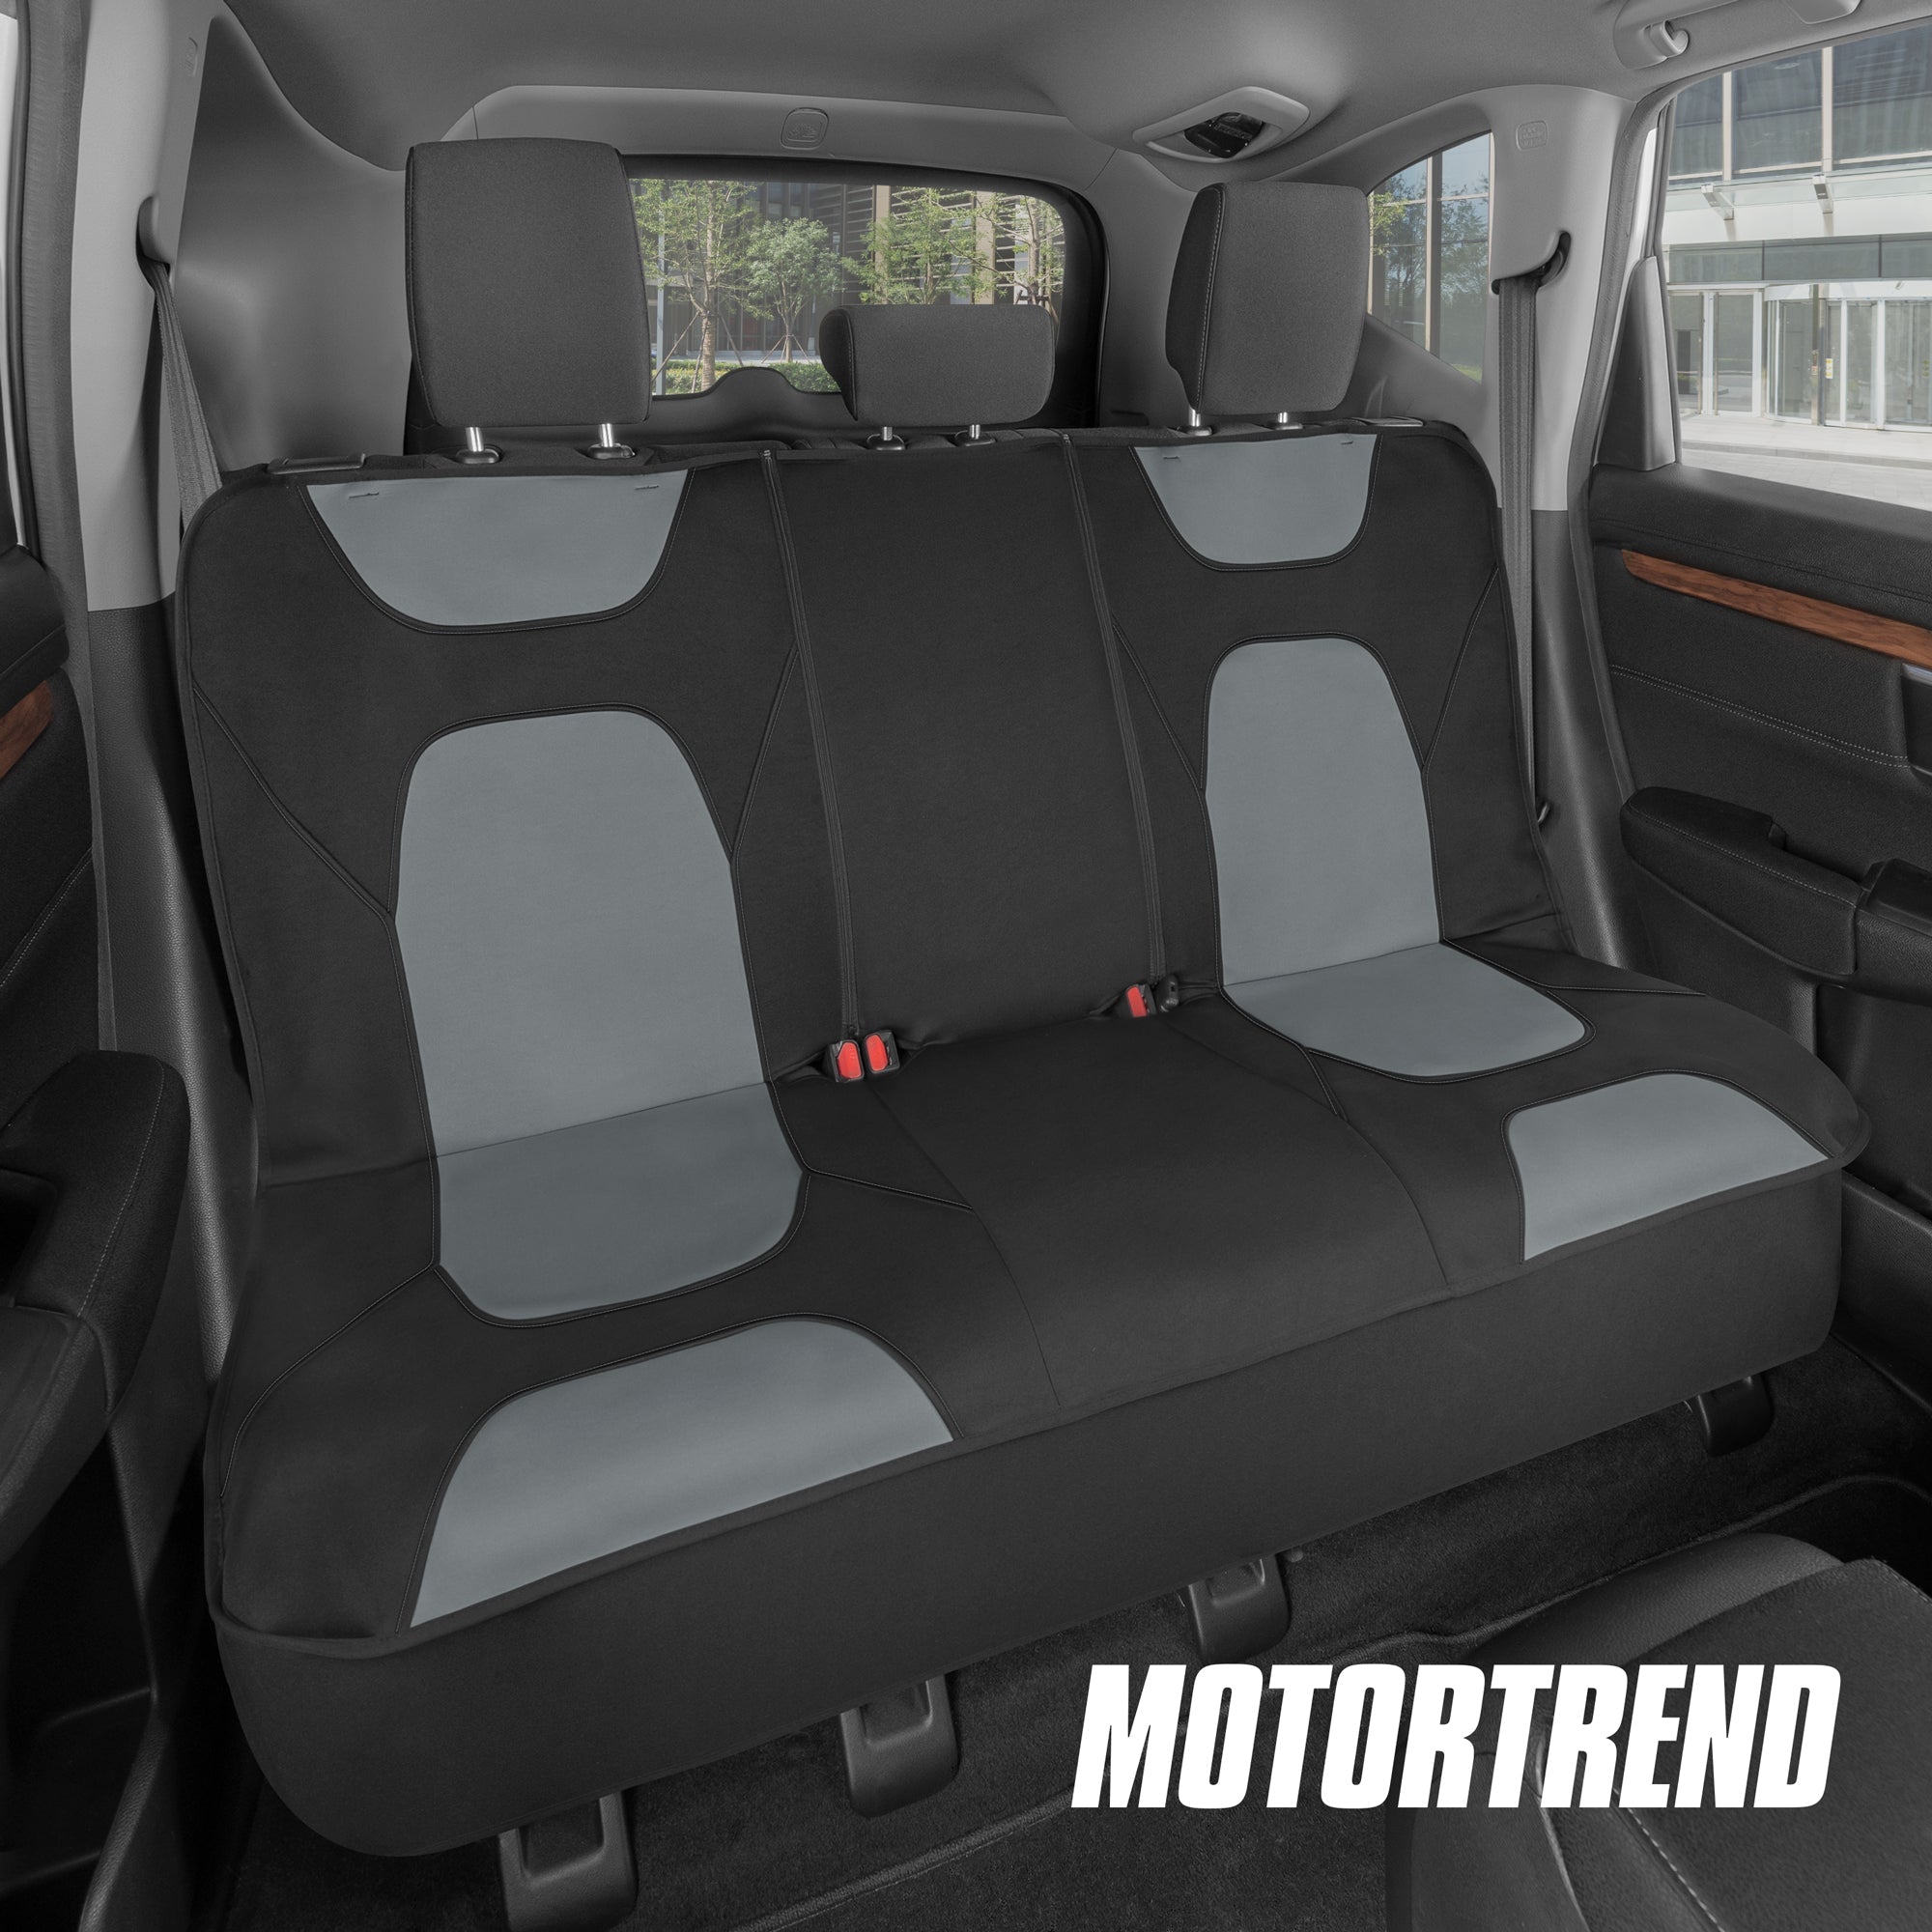 Motor Trend AquaShield Waterproof Car Back Seat Cover, Black – Padded Neoprene Rear Bench Seat Cover for Cars, Ideal Back Seat Protector for Kids & Dogs, Interior Cover for Auto Truck Van SUV - Black:#000000